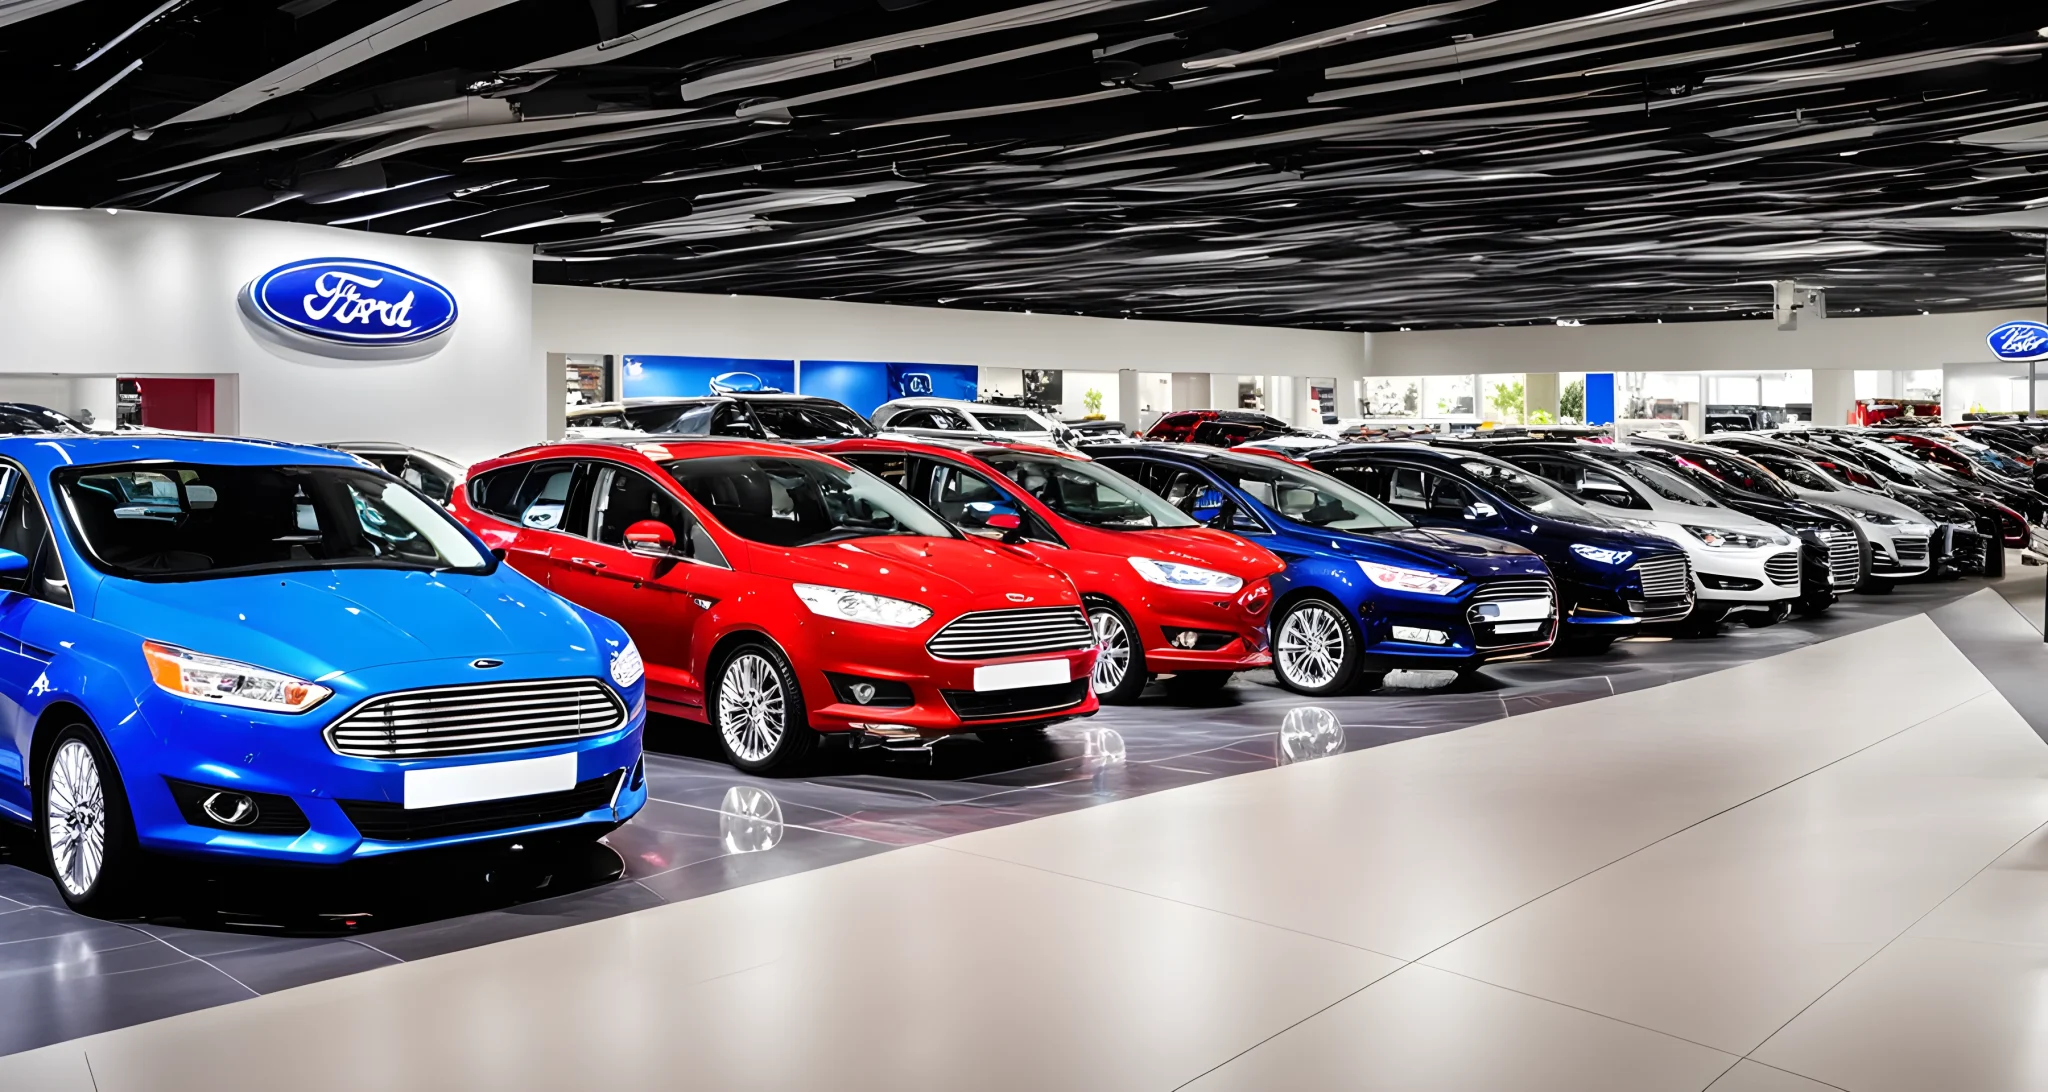 The image shows a Ford vehicle dealership with various new and used cars on display.